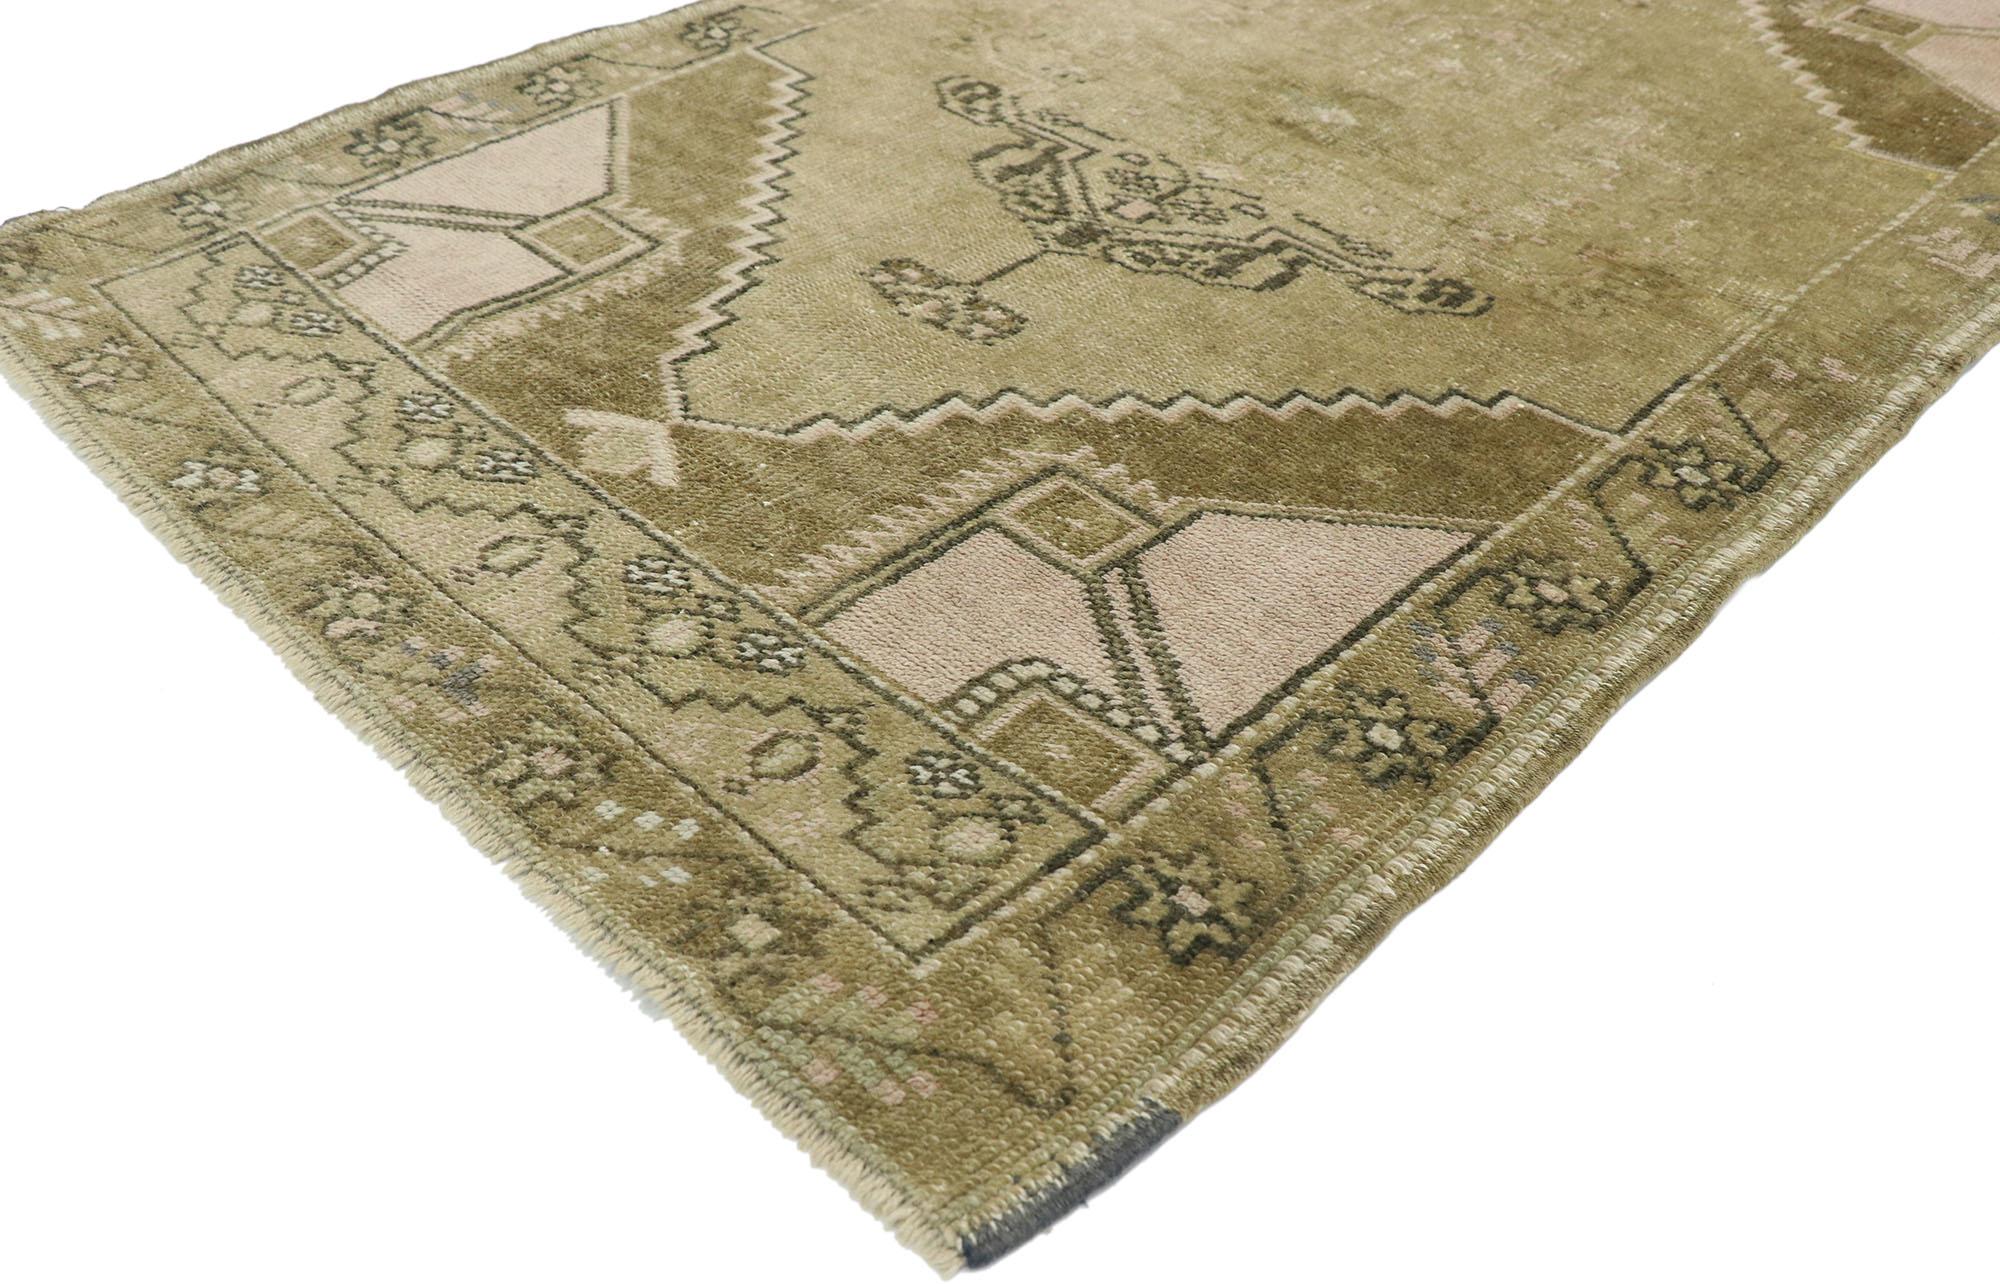 52701, vintage Turkish Kars rug with Romantic Mid-Century Modern style. This hand knotted wool vintage Turkish Kars rug features a cusped central medallion anchored with palmette pendants on either end floating in an open abrashed cut-out field.